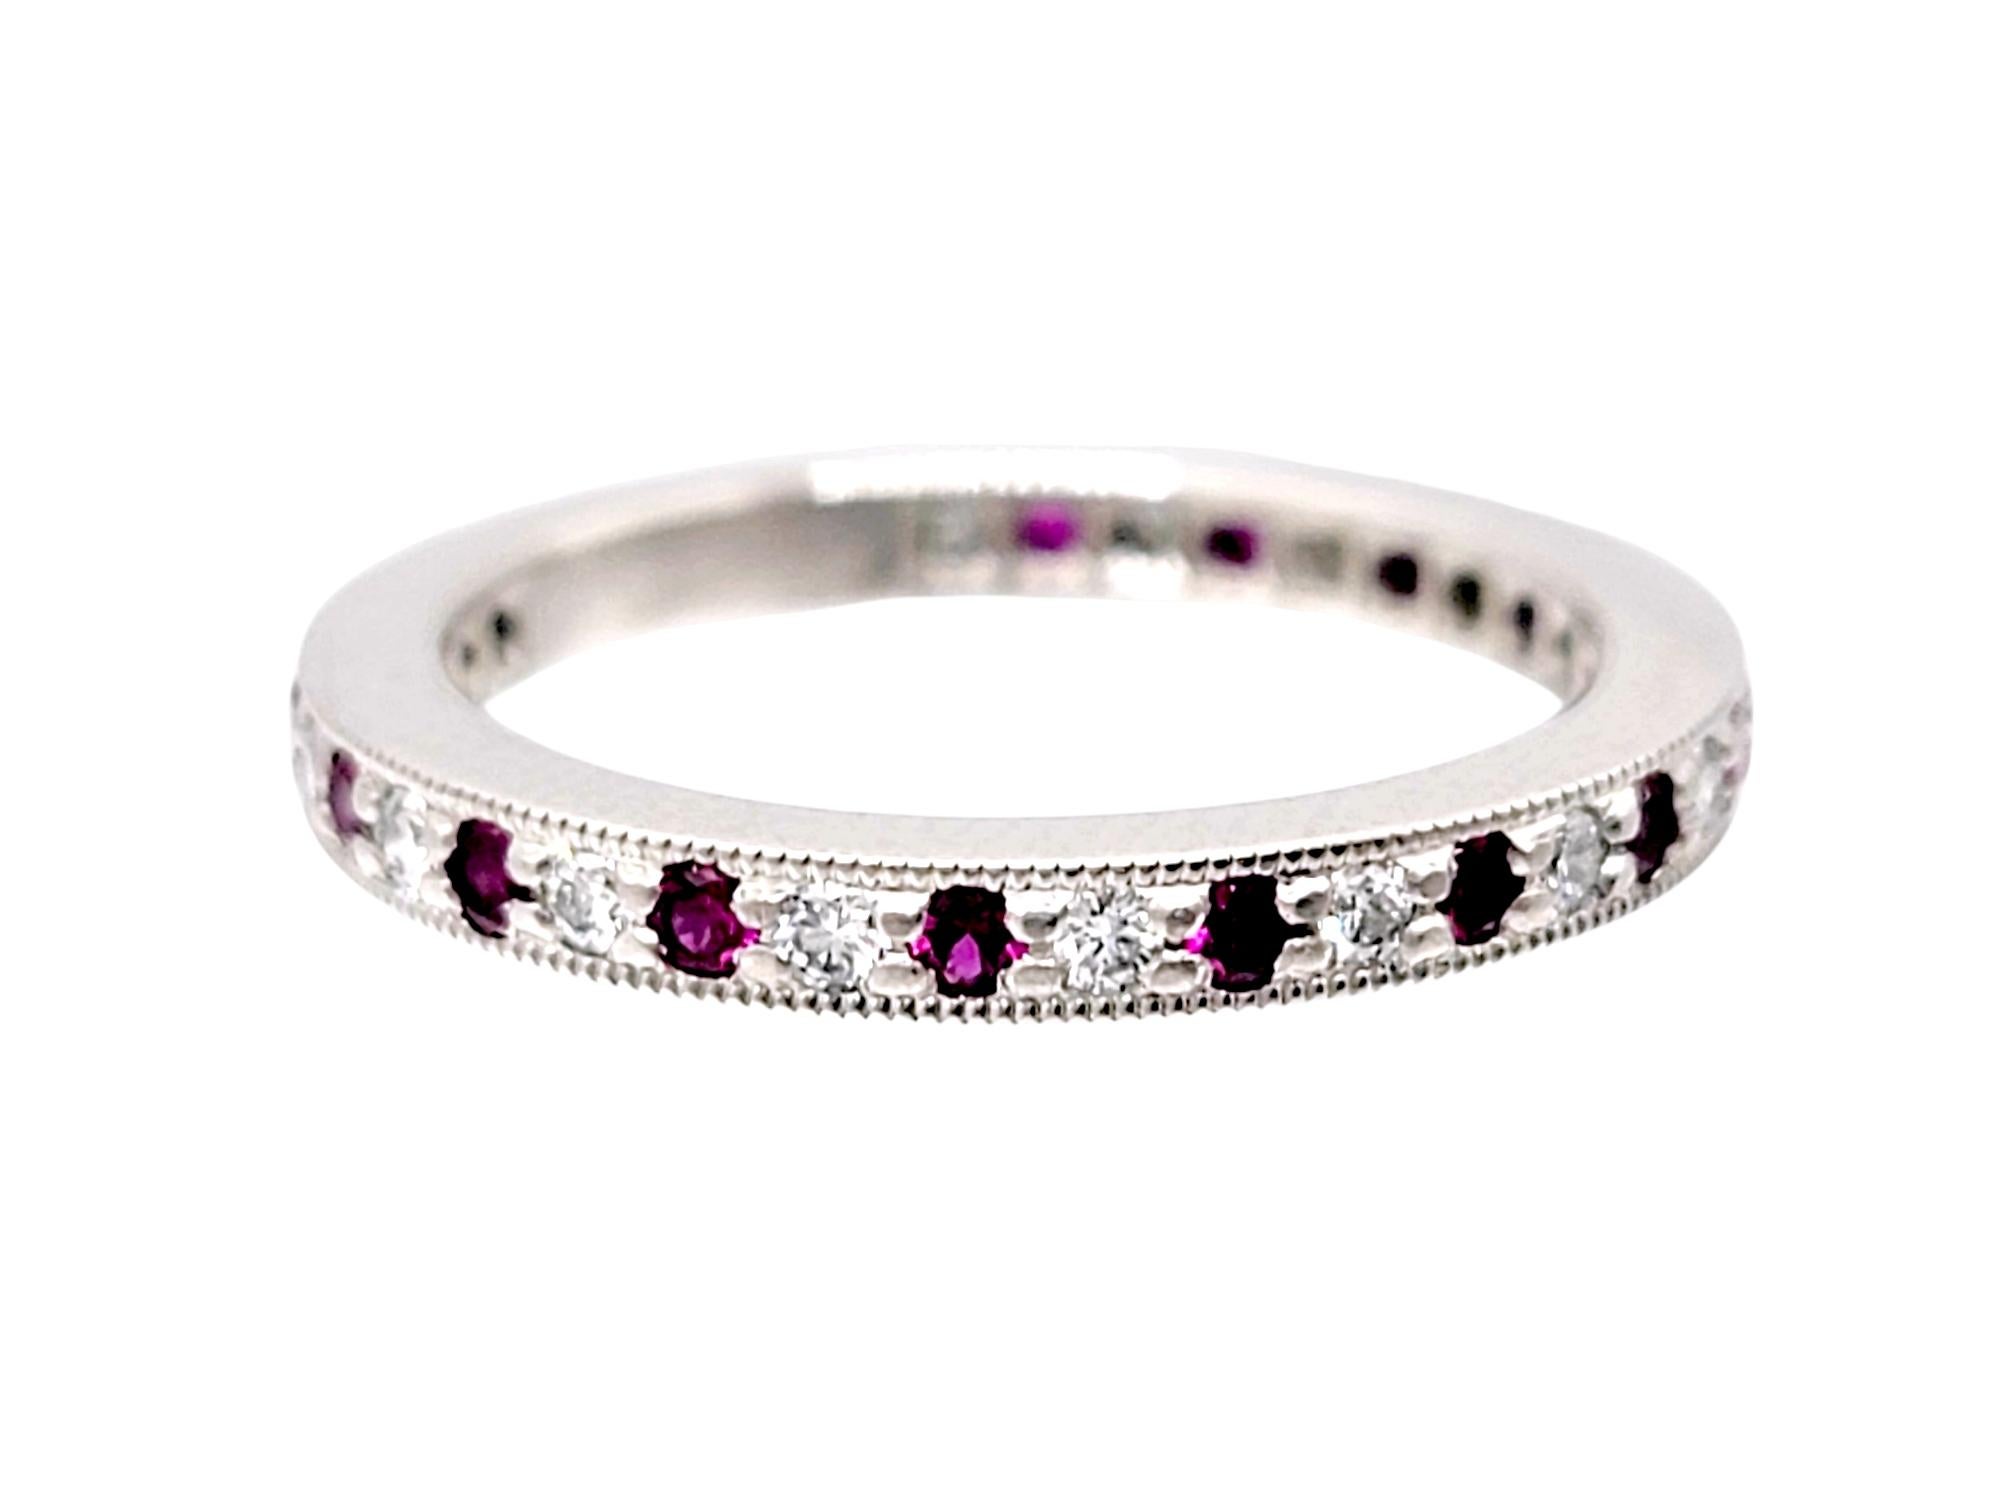 Ring size: 4.25

Stunning Tiffany & Co. Legacy Collection ruby and diamond eternity band ring. This timeless beauty features deep red rubies and icy white diamonds bead set in an alternating pattern throughout the piece. The thin, milgrain edged